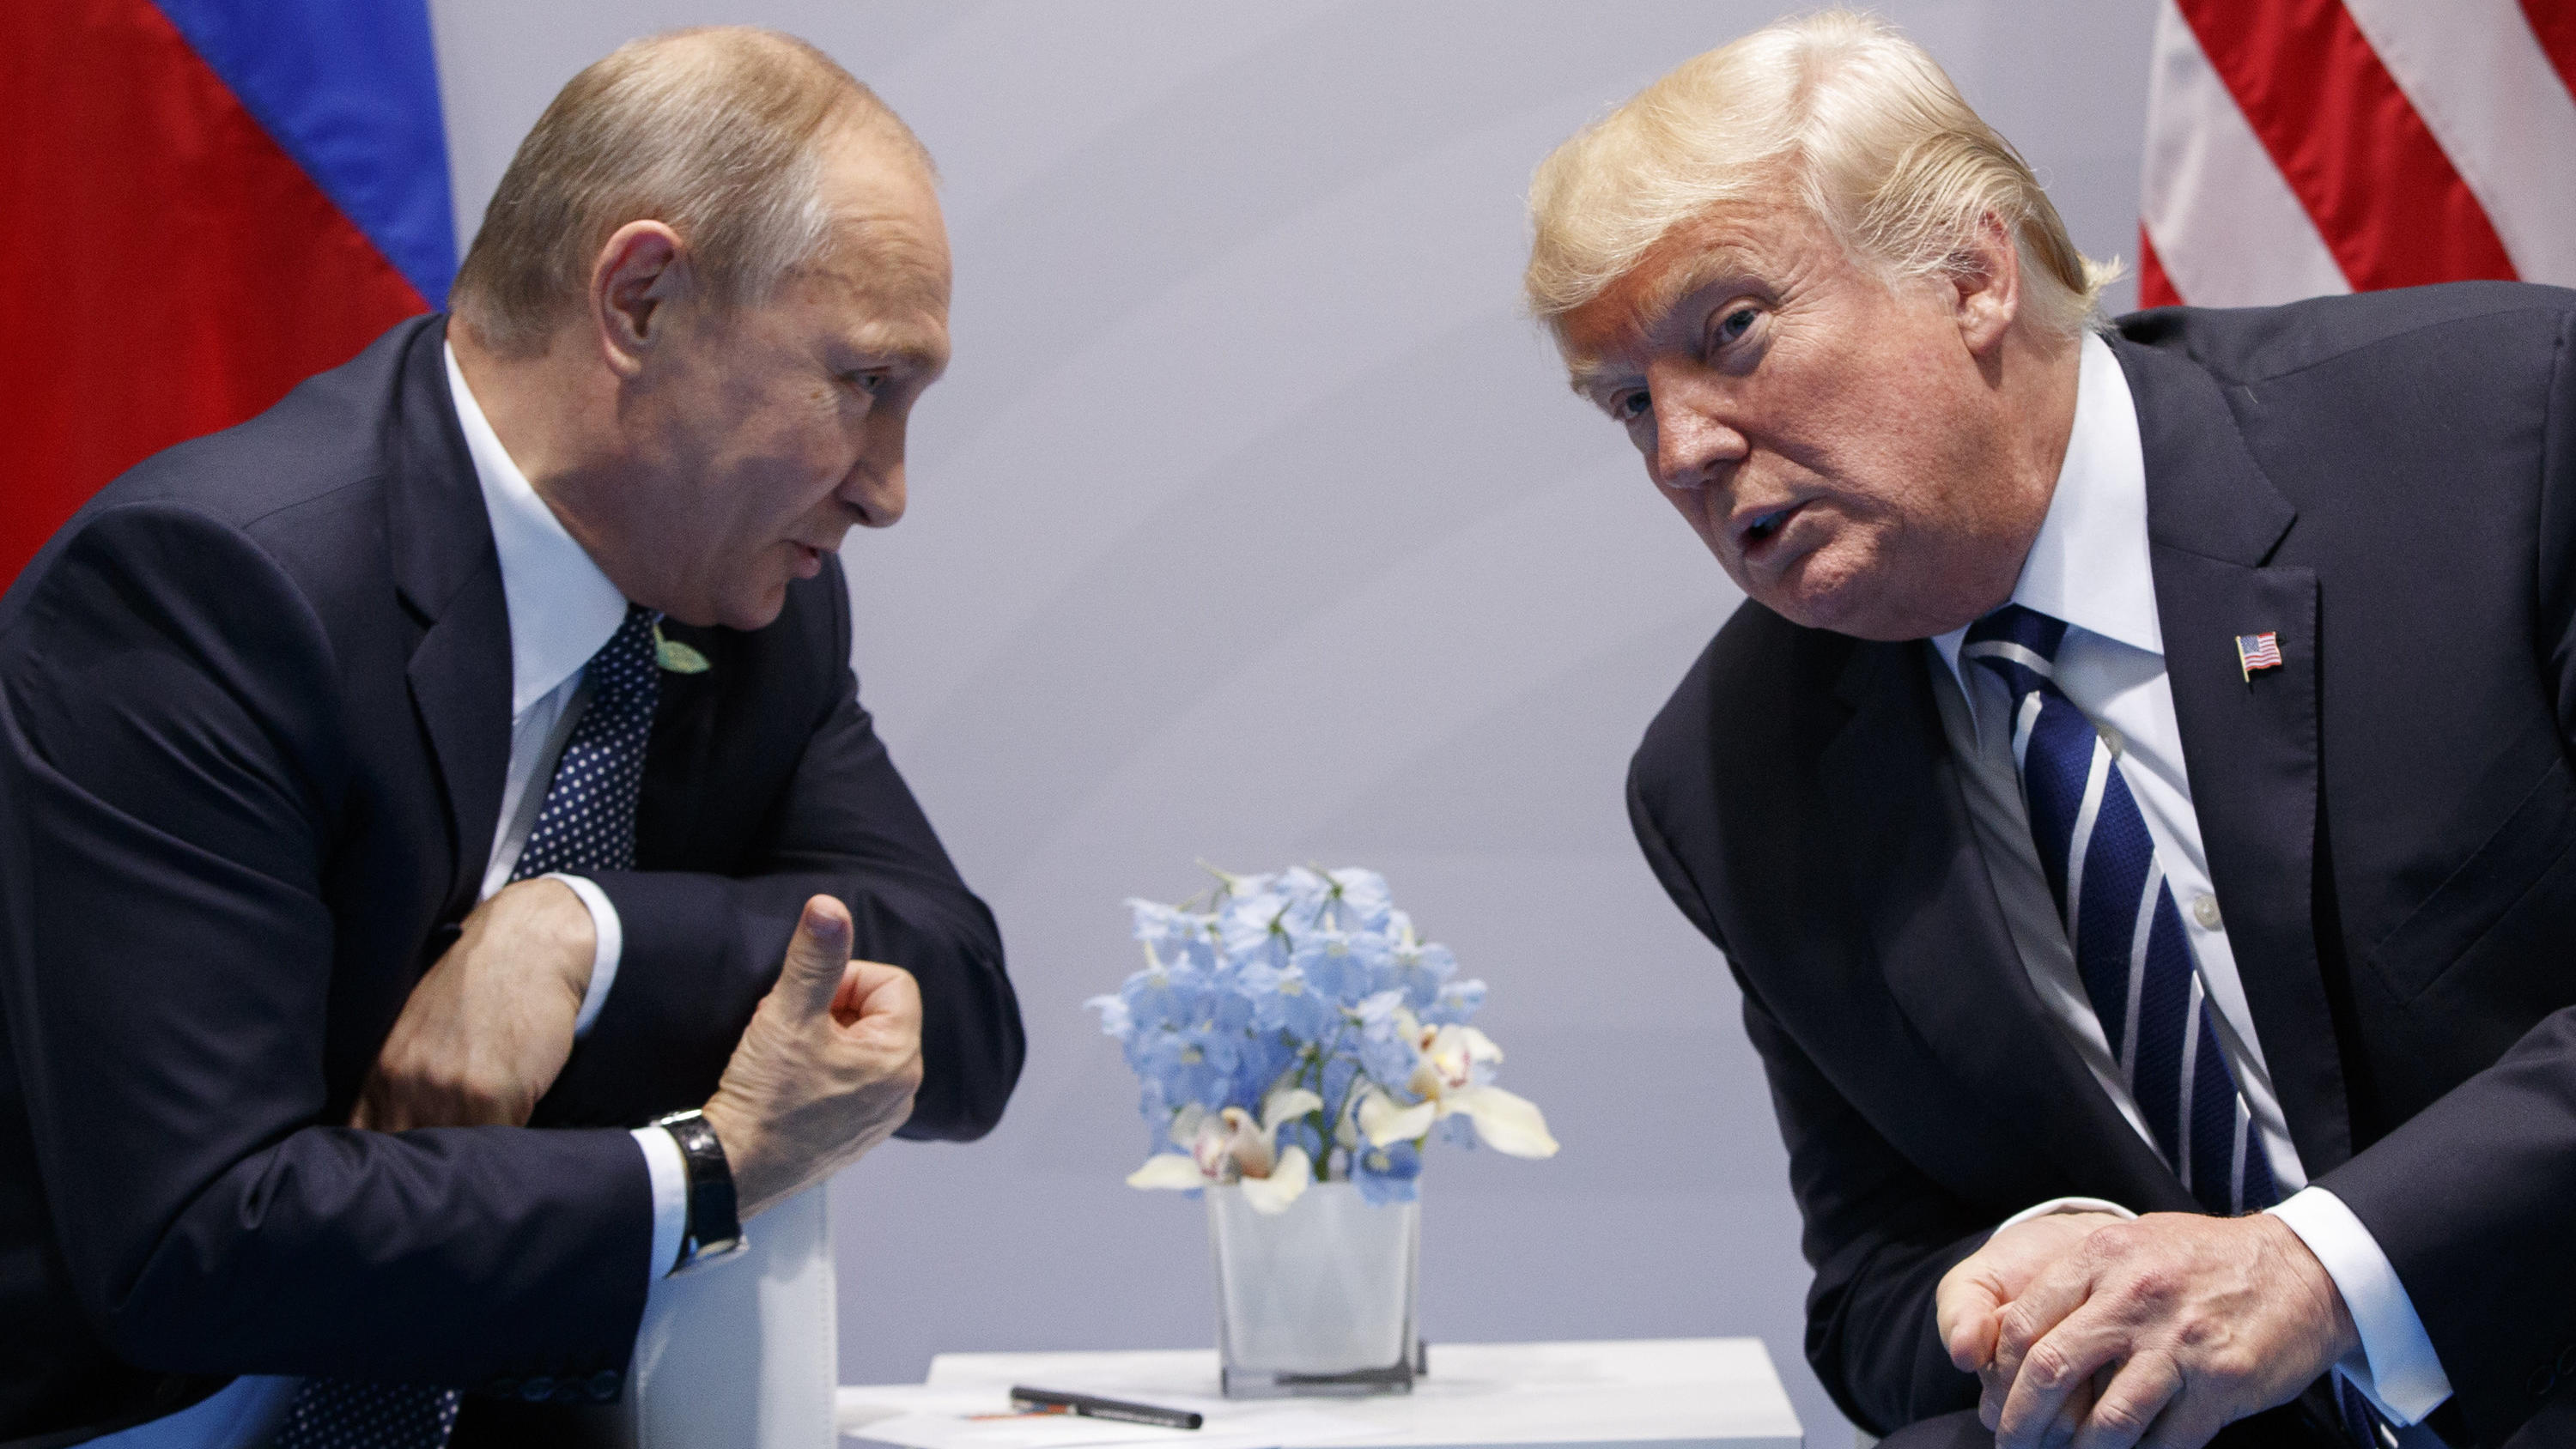 FILE - In this  July 7, 2017, file photo, U.S. President Donald Trump meets with Russian President Vladimir Putin at the G-20 Summit in Hamburg. Putin wonâ€™t congratulate President-elect Joe Biden until legal challenges to the U.S. election are reso